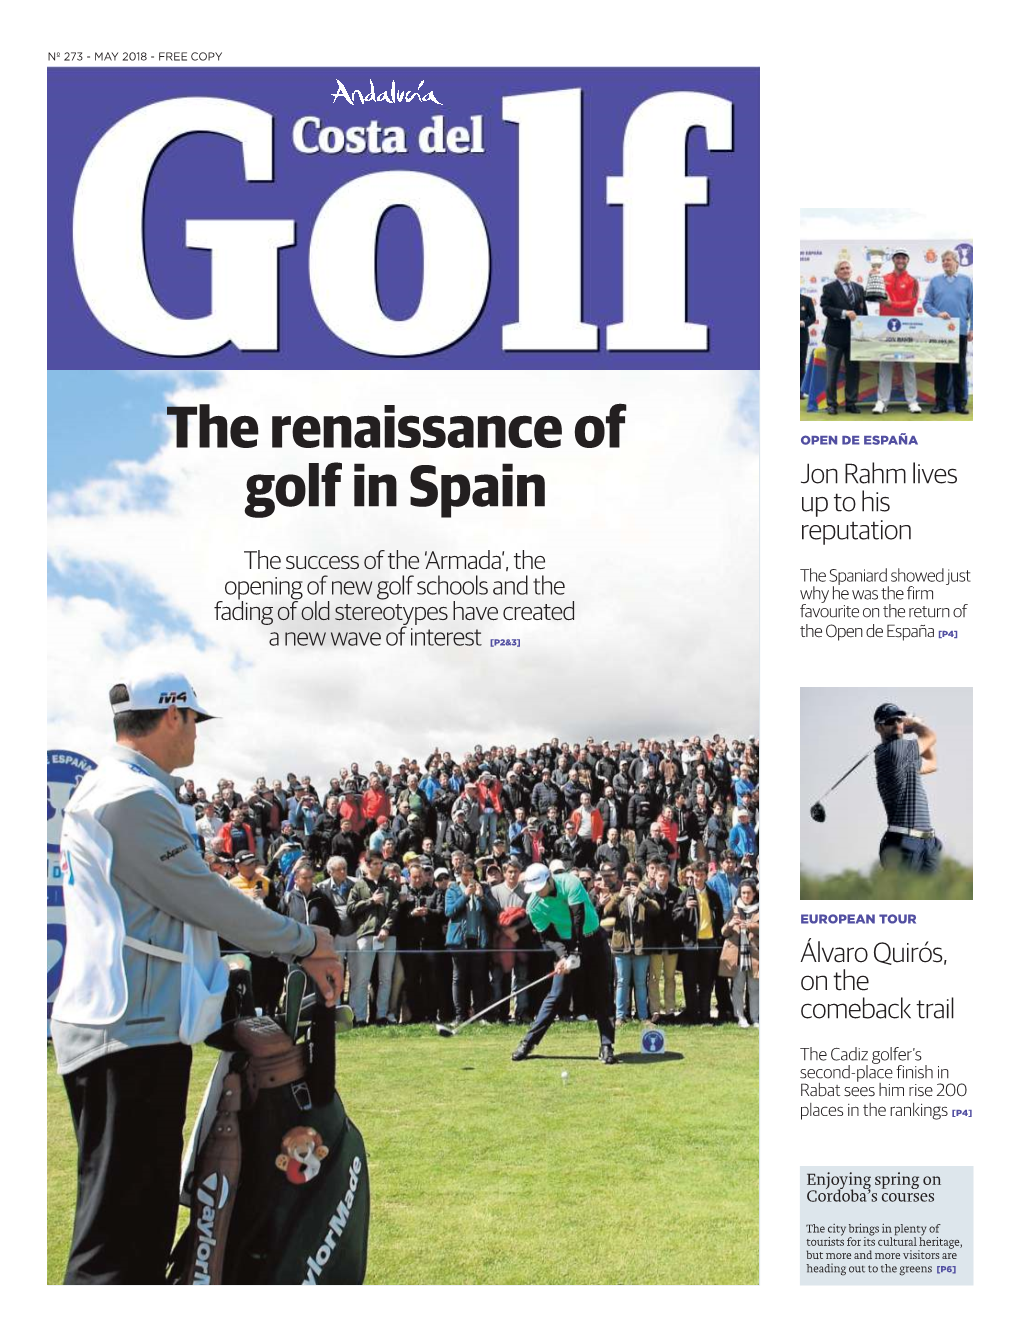 The Renaissance of Golf in Spain